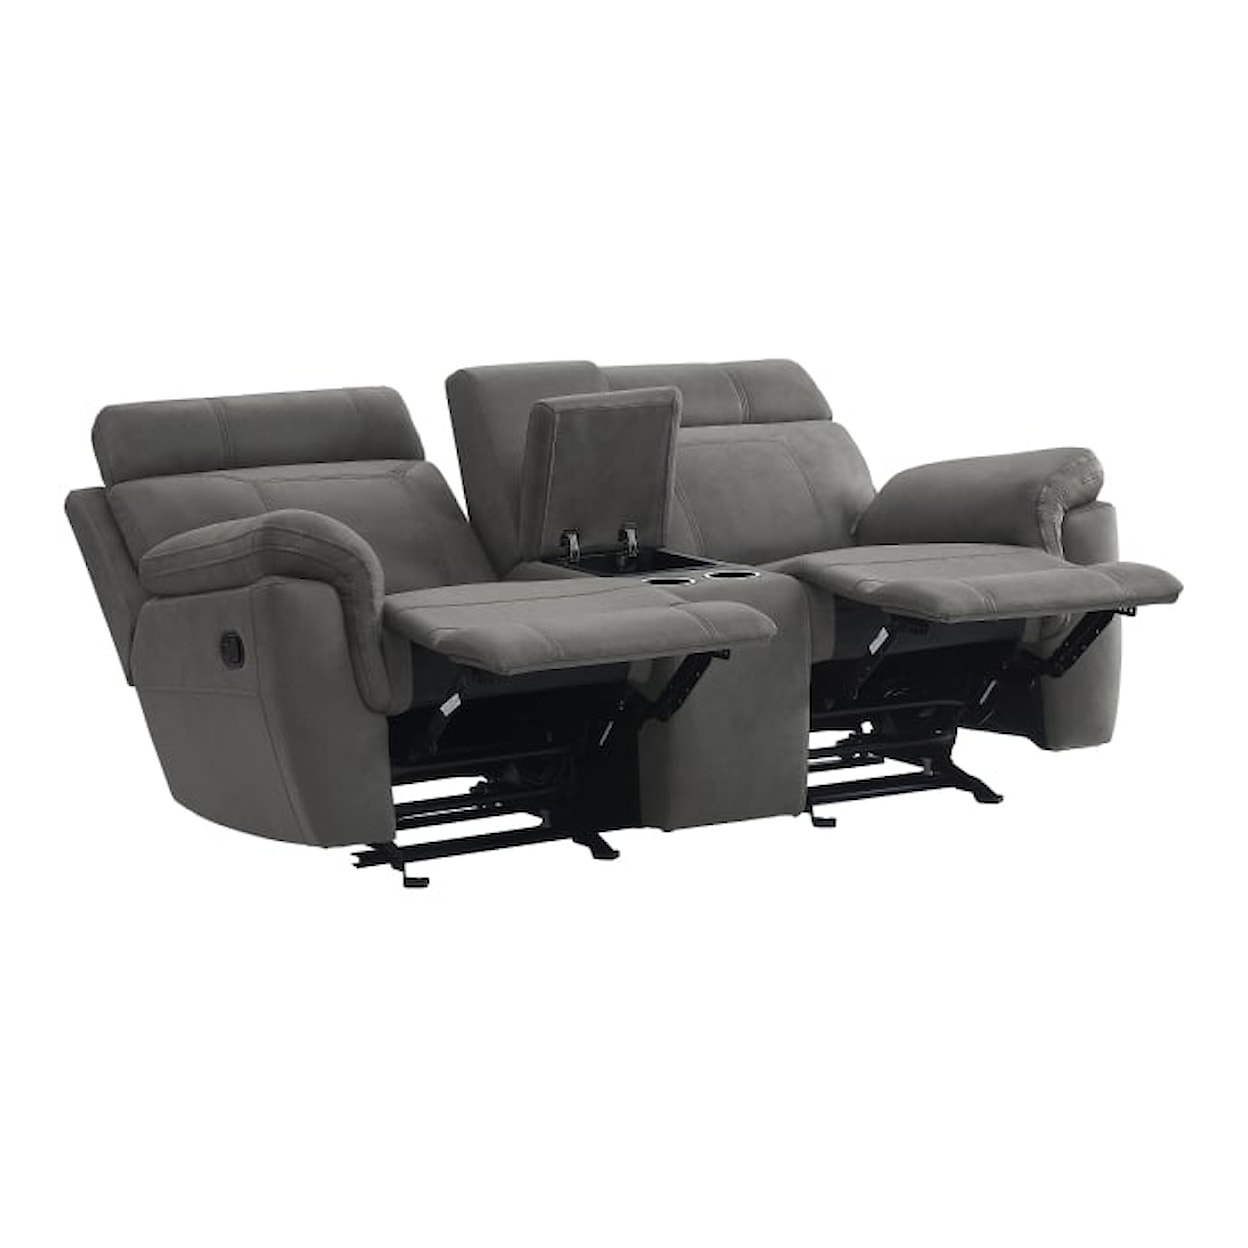 Homelegance Clifton Double Glider Reclining Loveseat